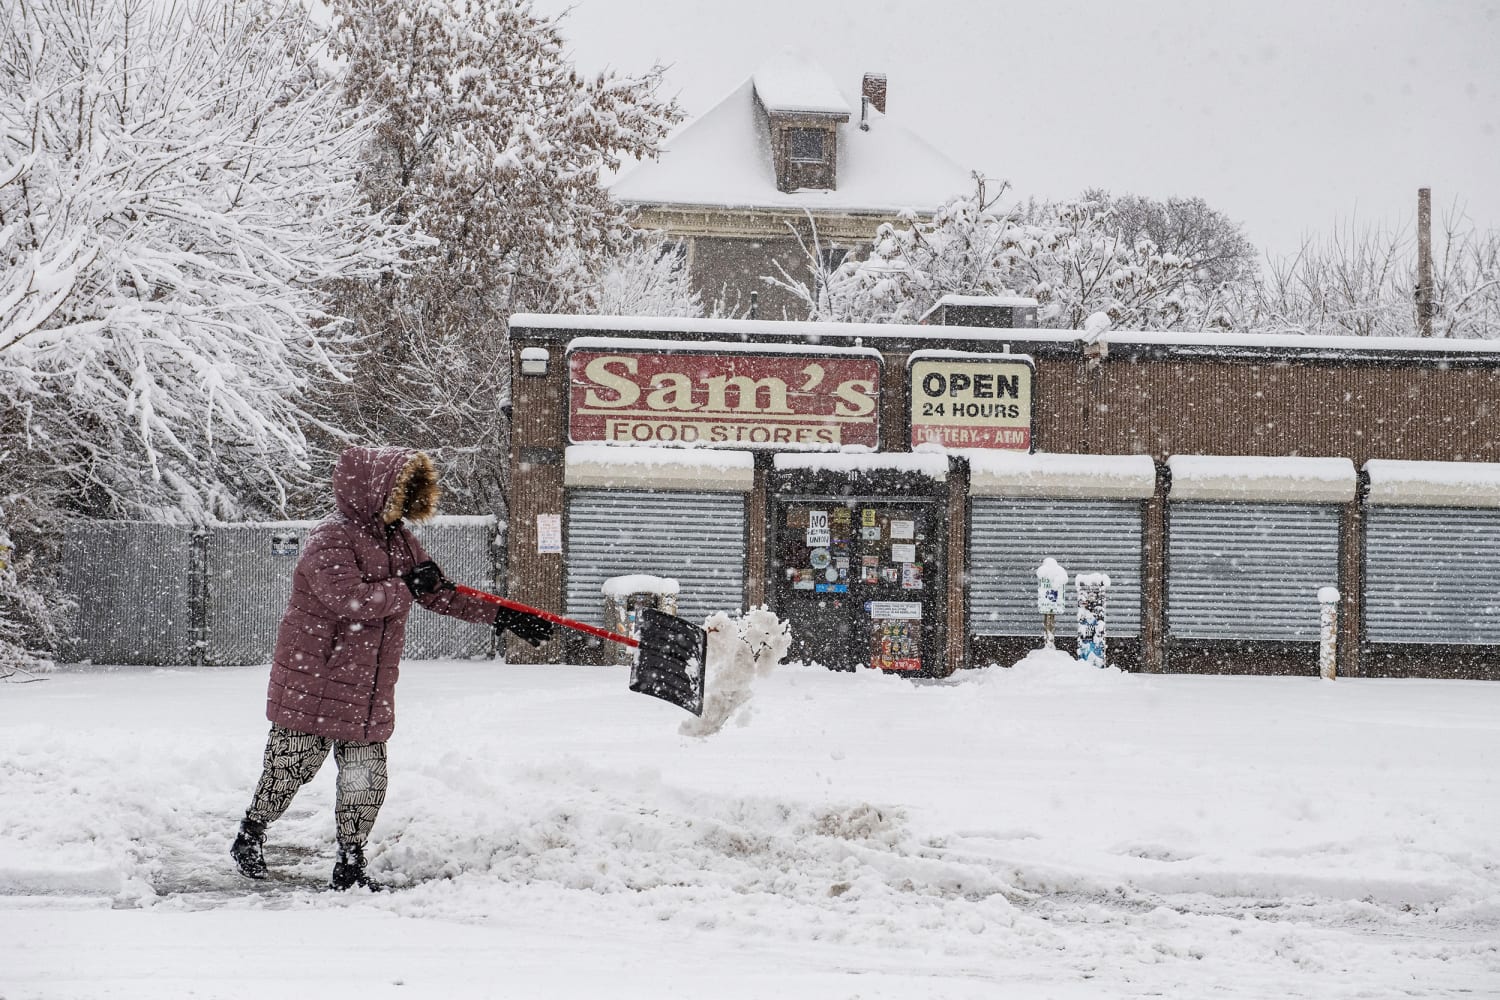 Major winter storms bring snow, ice and travel hazards to both US coasts